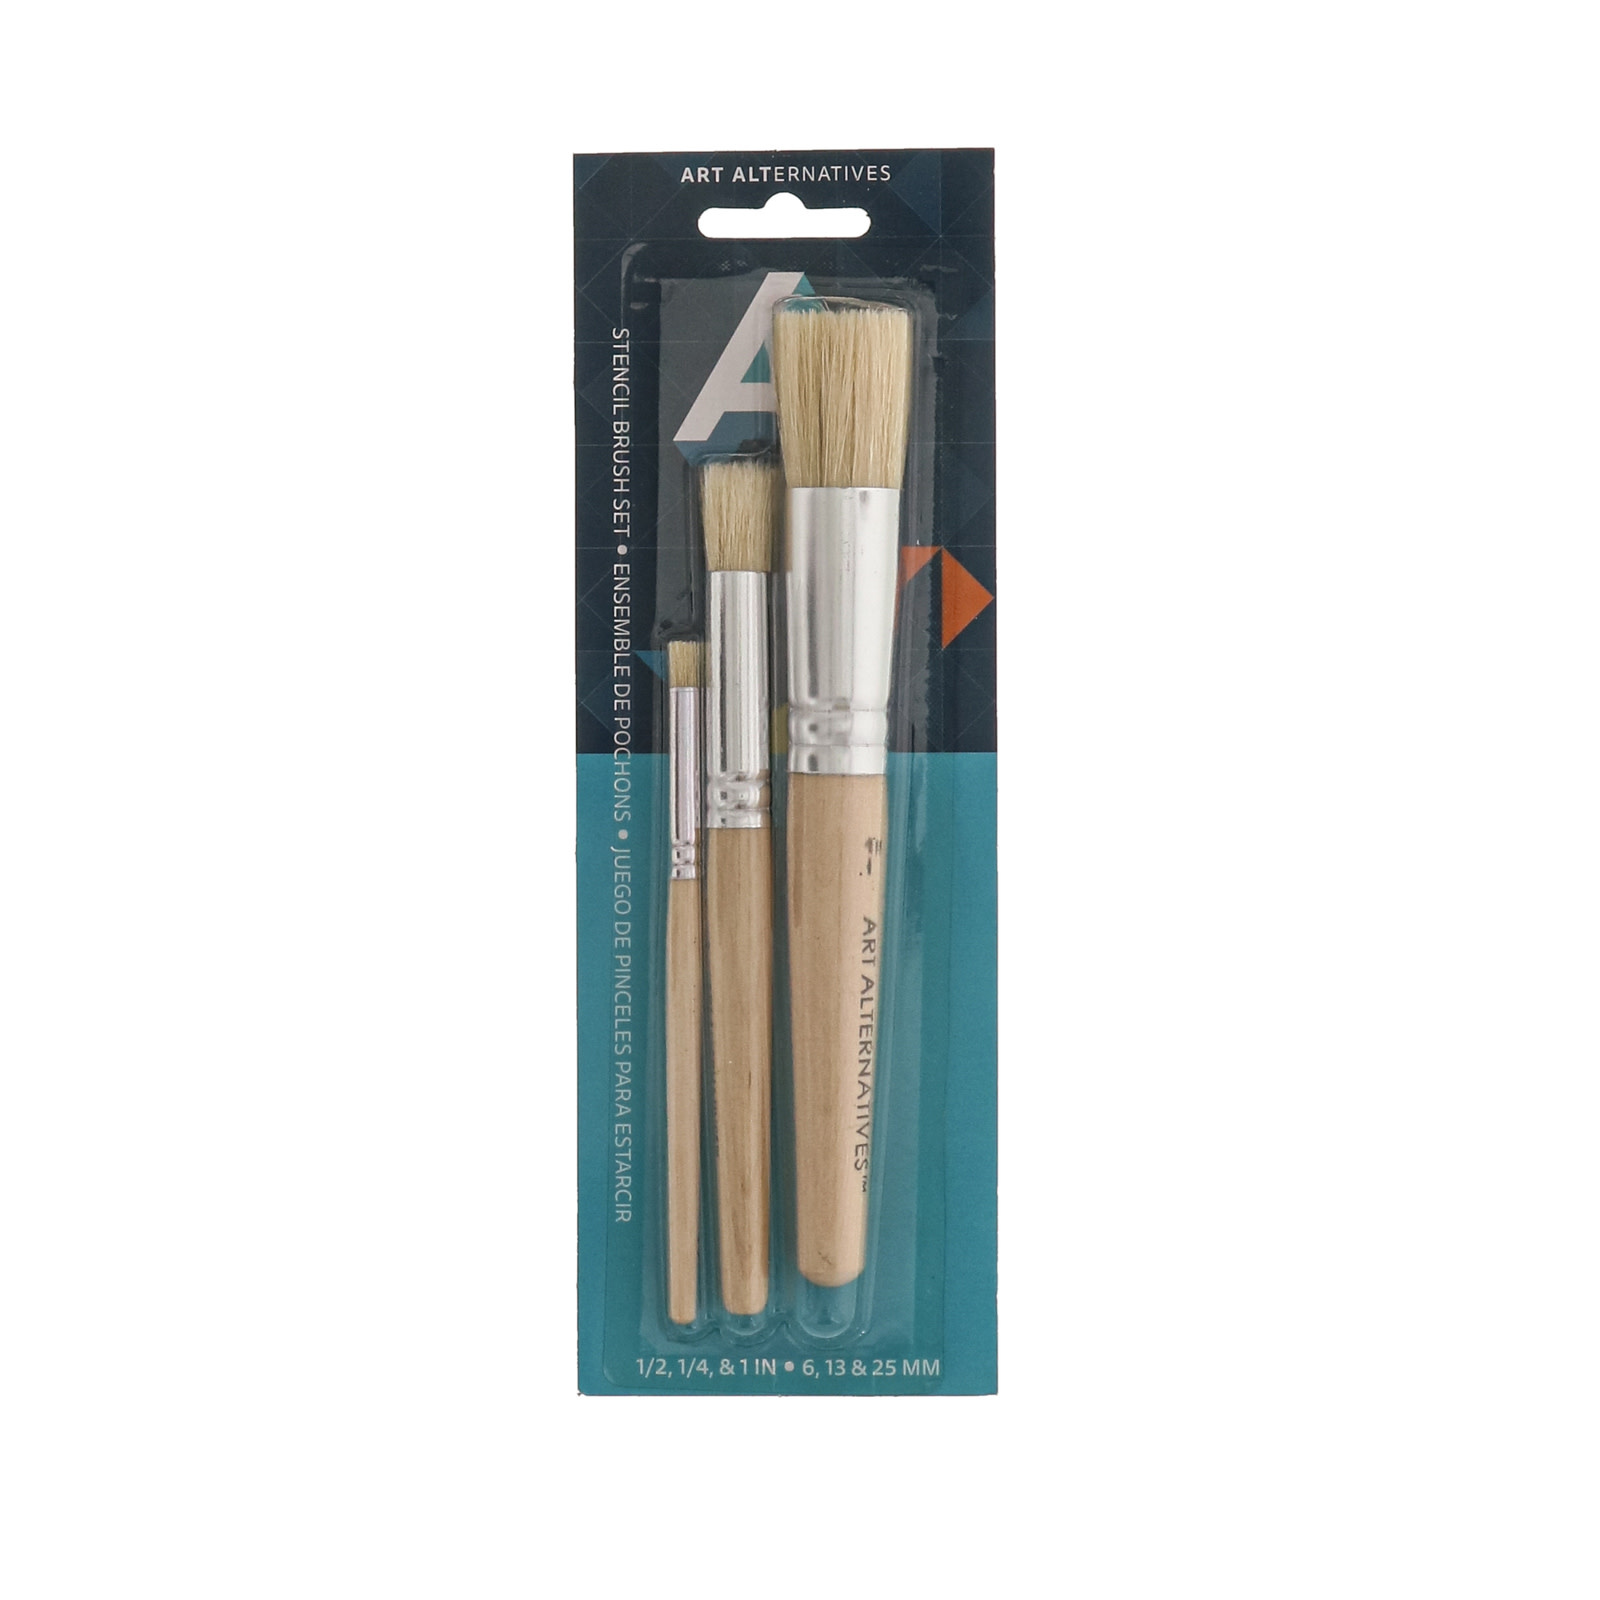 Art Alternatives Stencil Brush, Set of 3, 1/4in, 1/2in, and 1in.